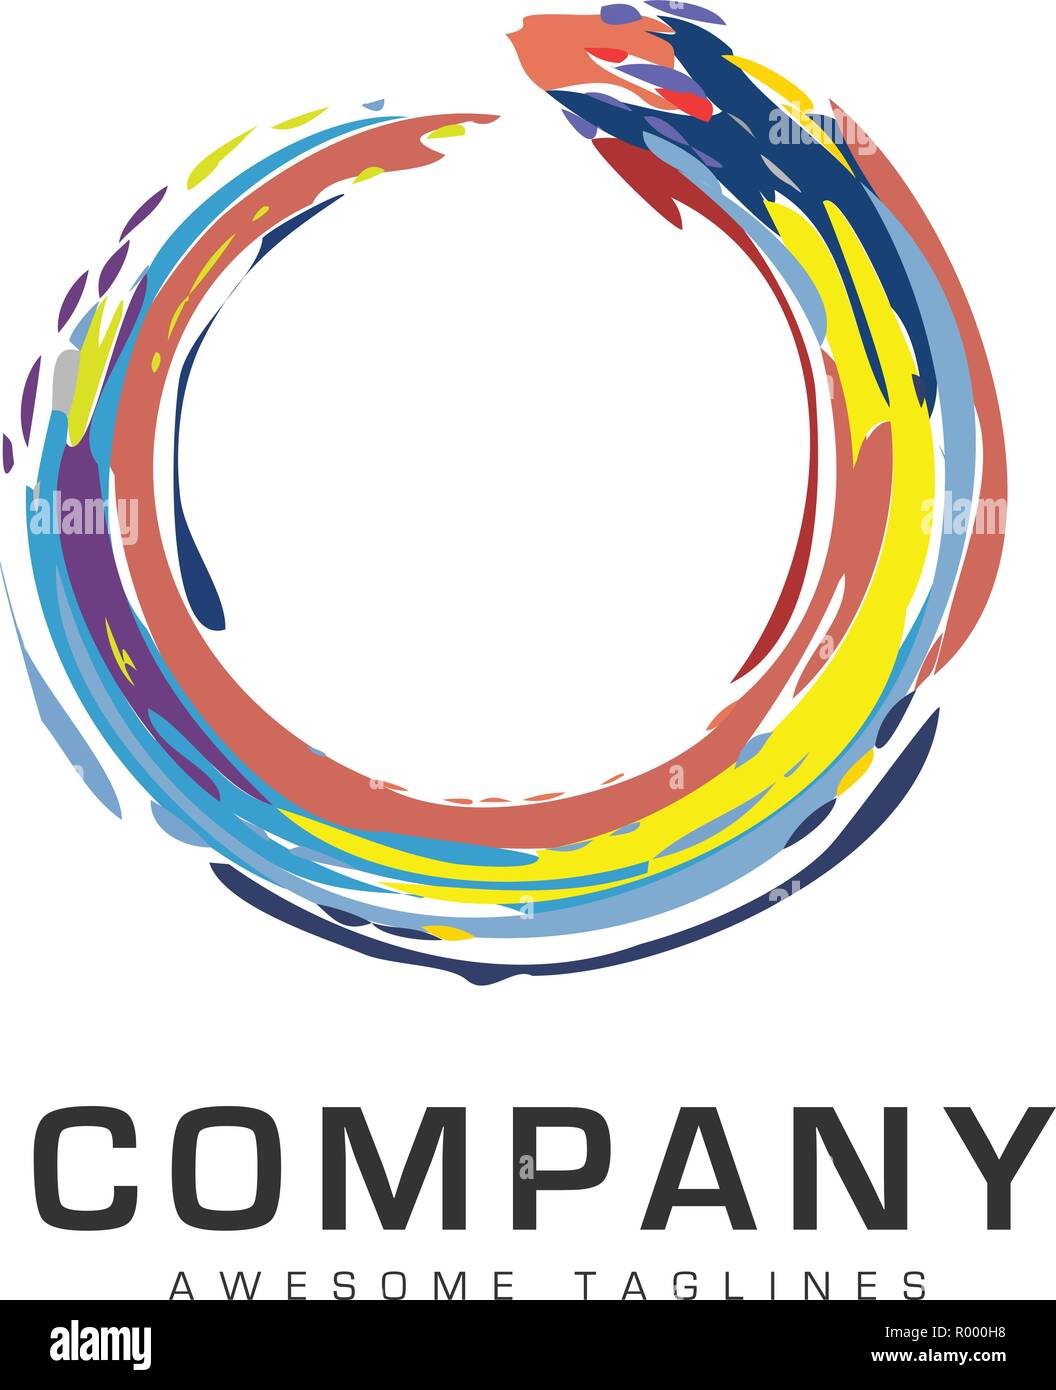 Abstract circle business company logo. Corporate circle rainbow color identity design element. Color circle segments mix, Stock Vector